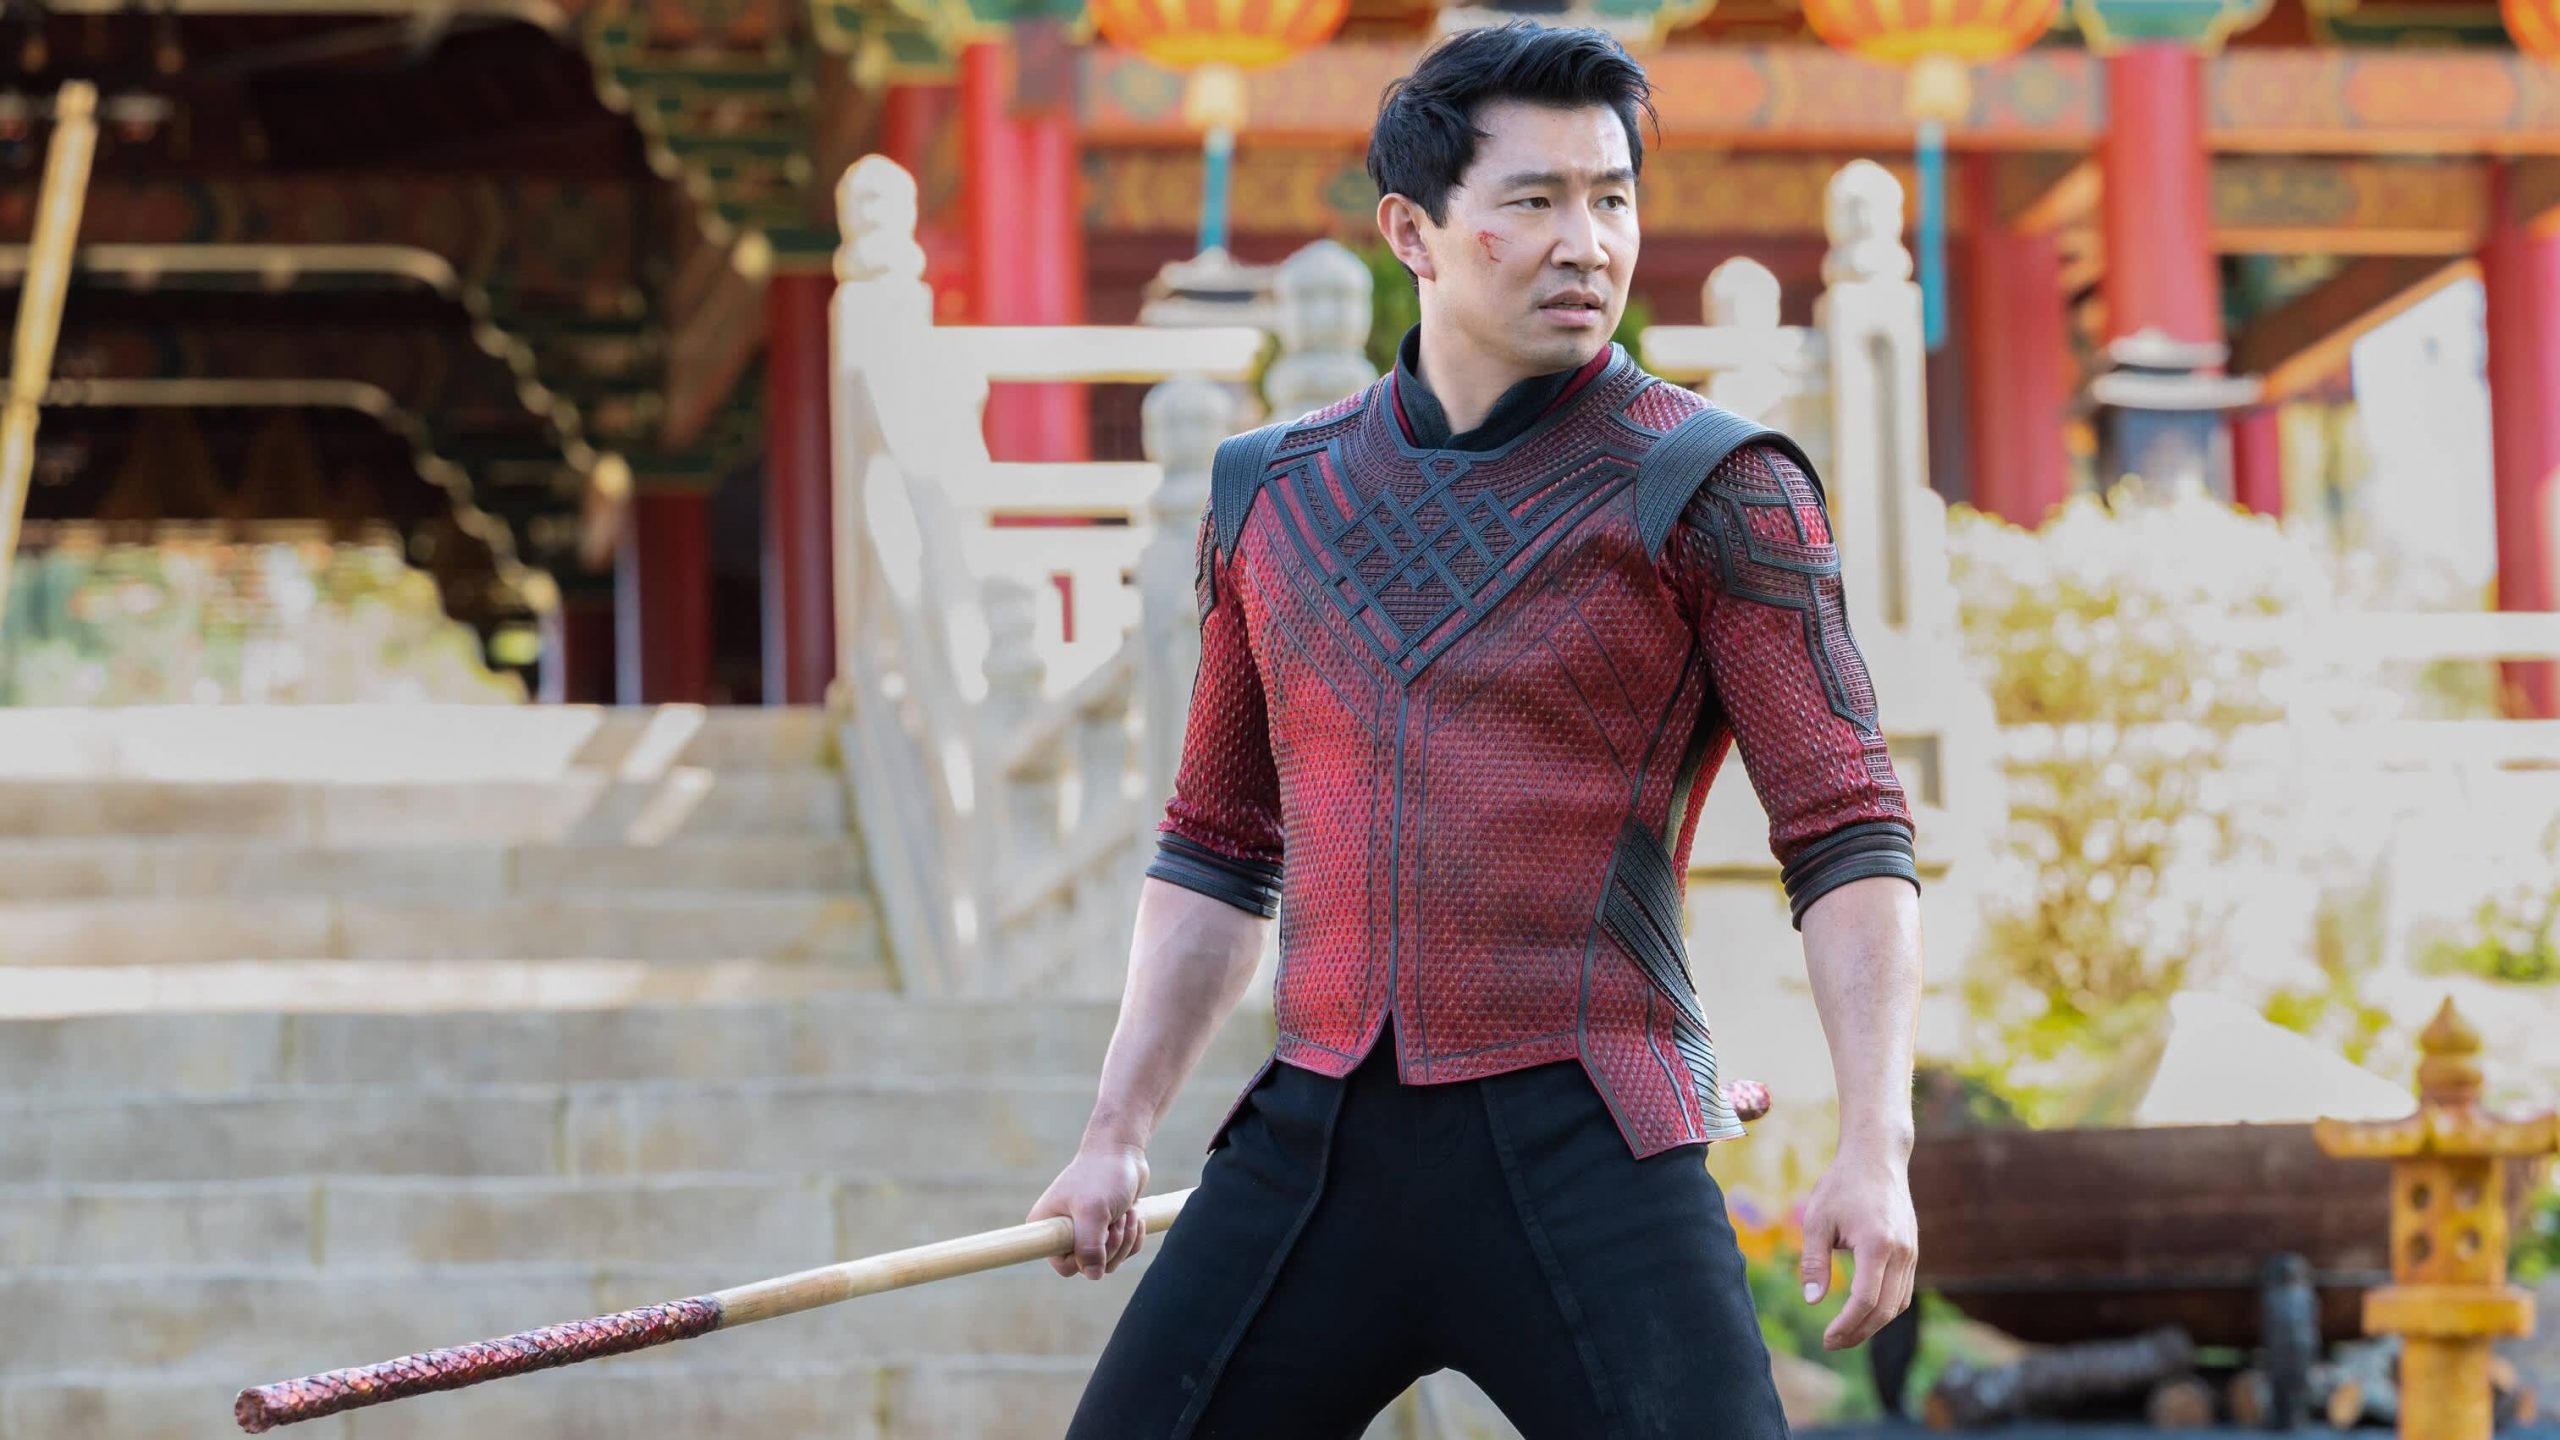 Marvel's 'Shang-Chi' snares $71.4 million in domestic opening, second-highest of the pandemic